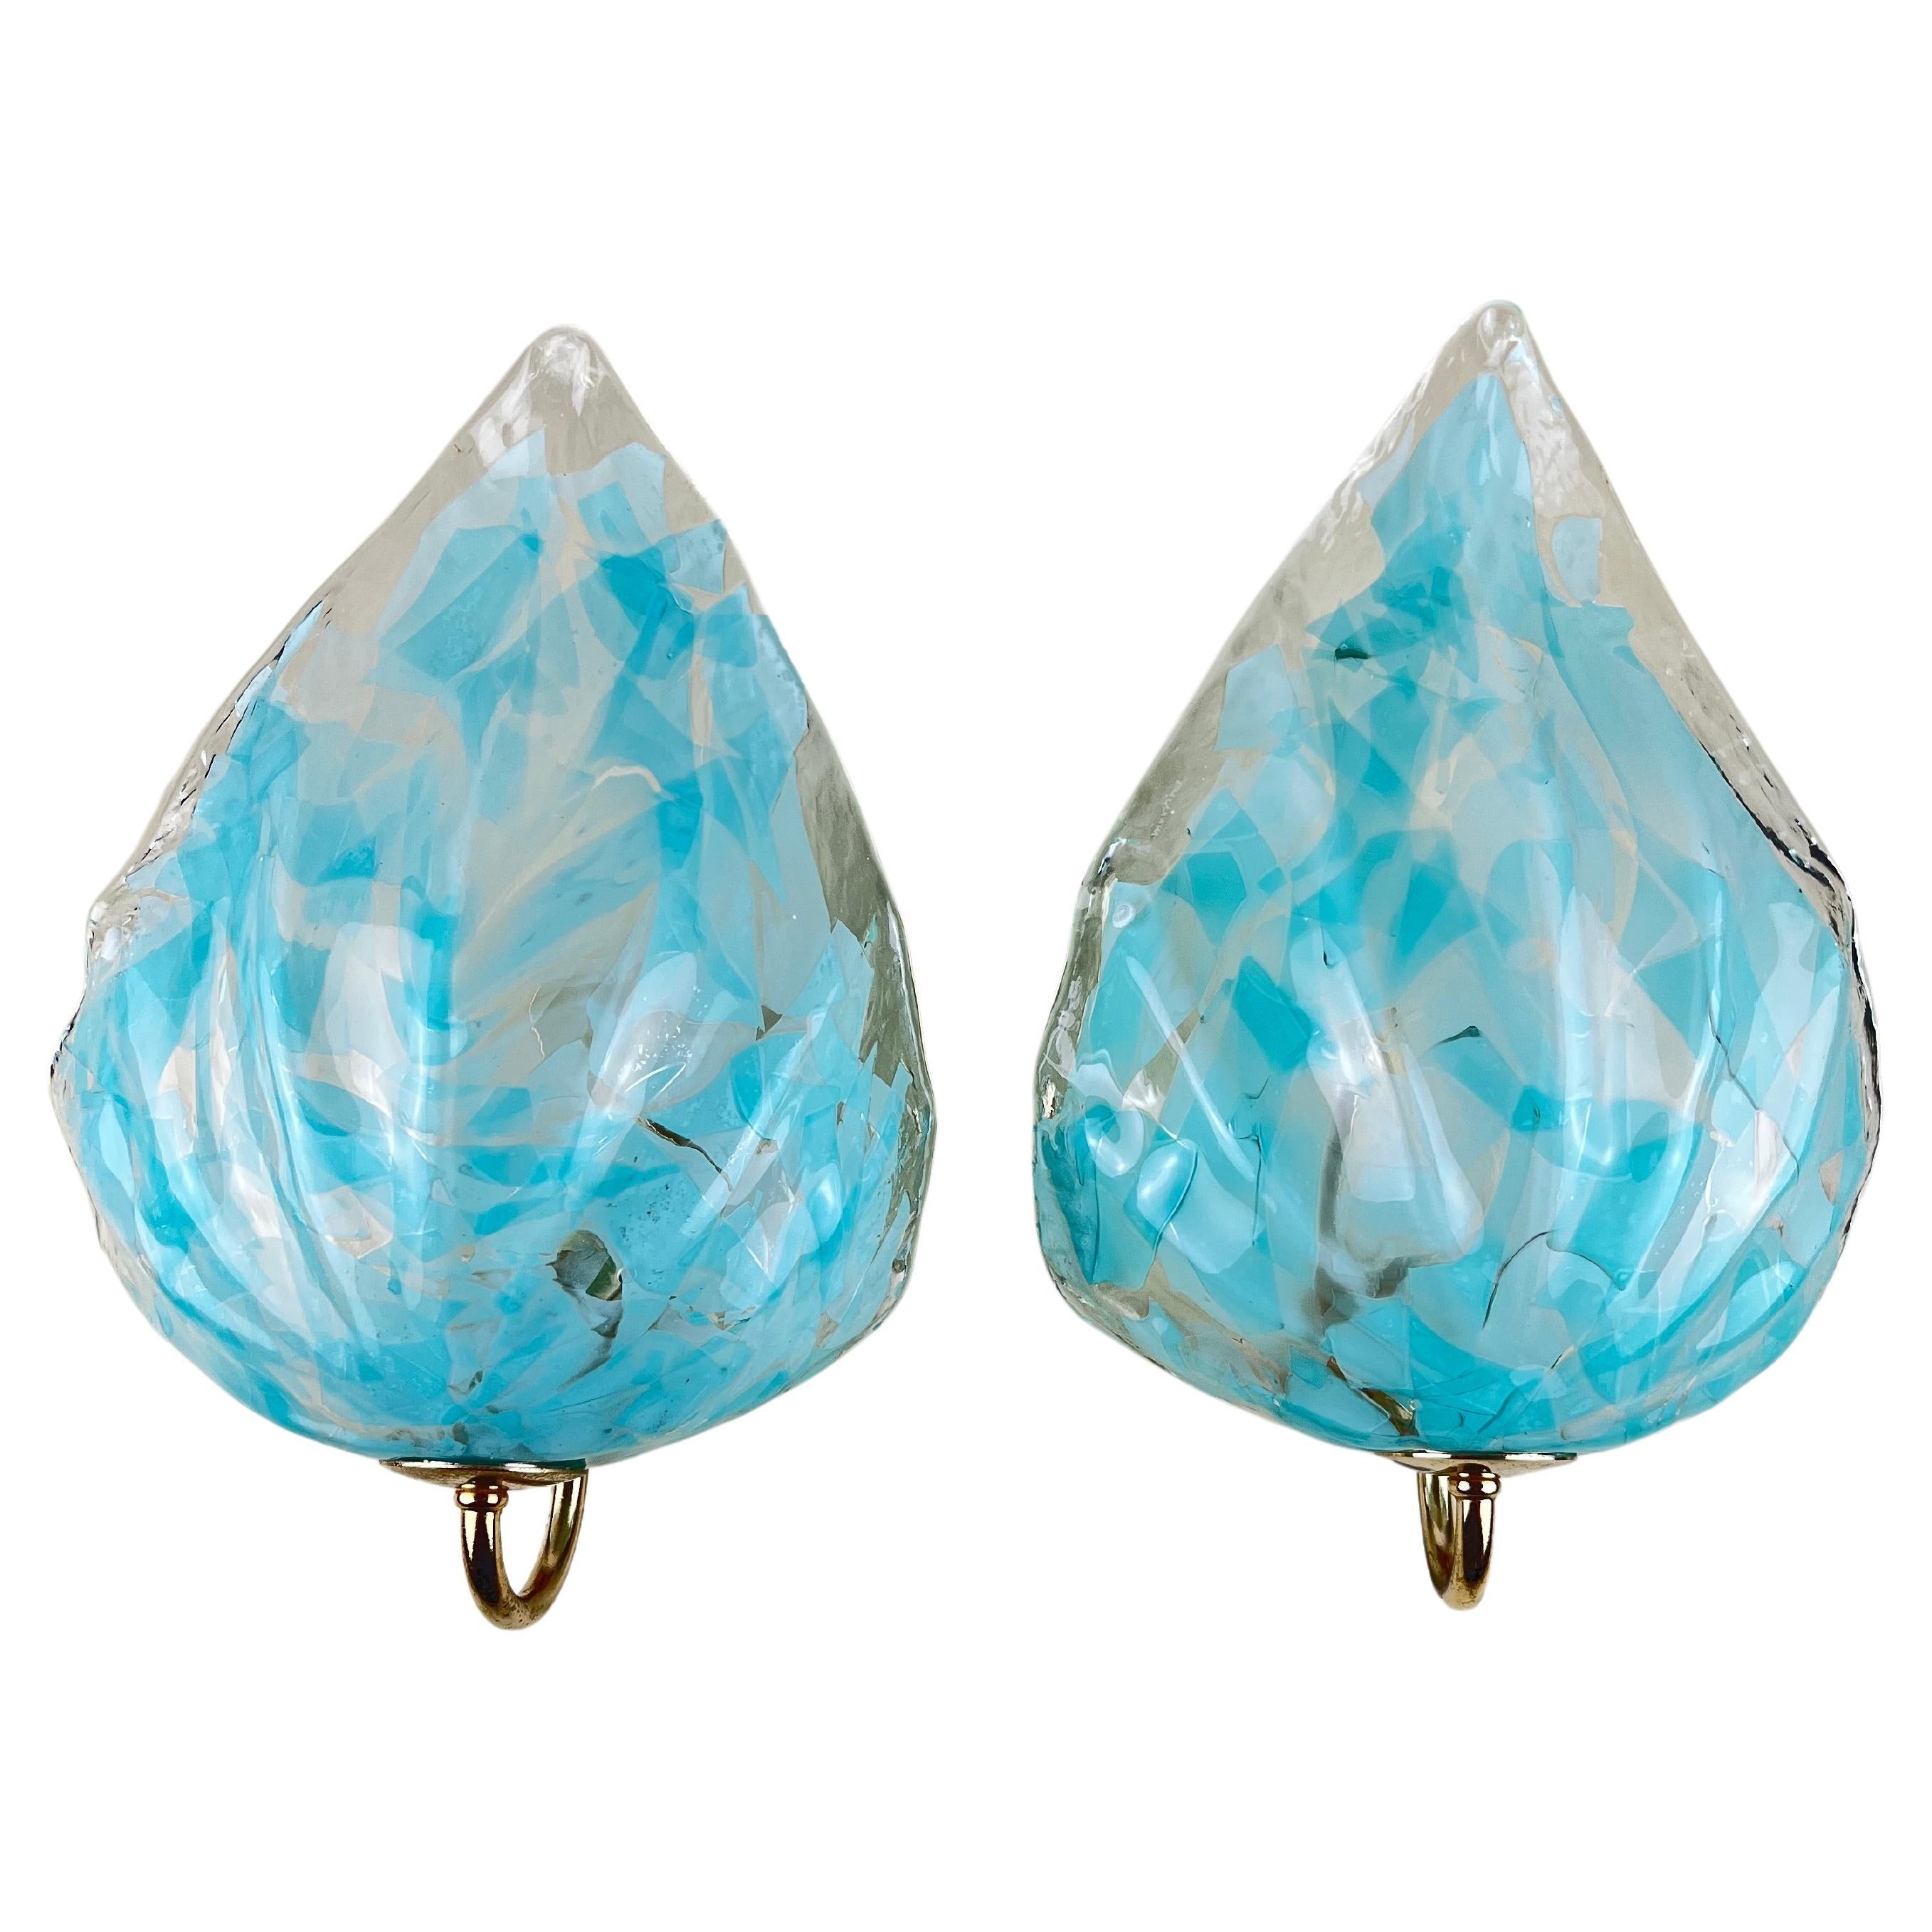 Pair of Murano Glass Wall Lamps, La Murrina, Italy, 1980s For Sale